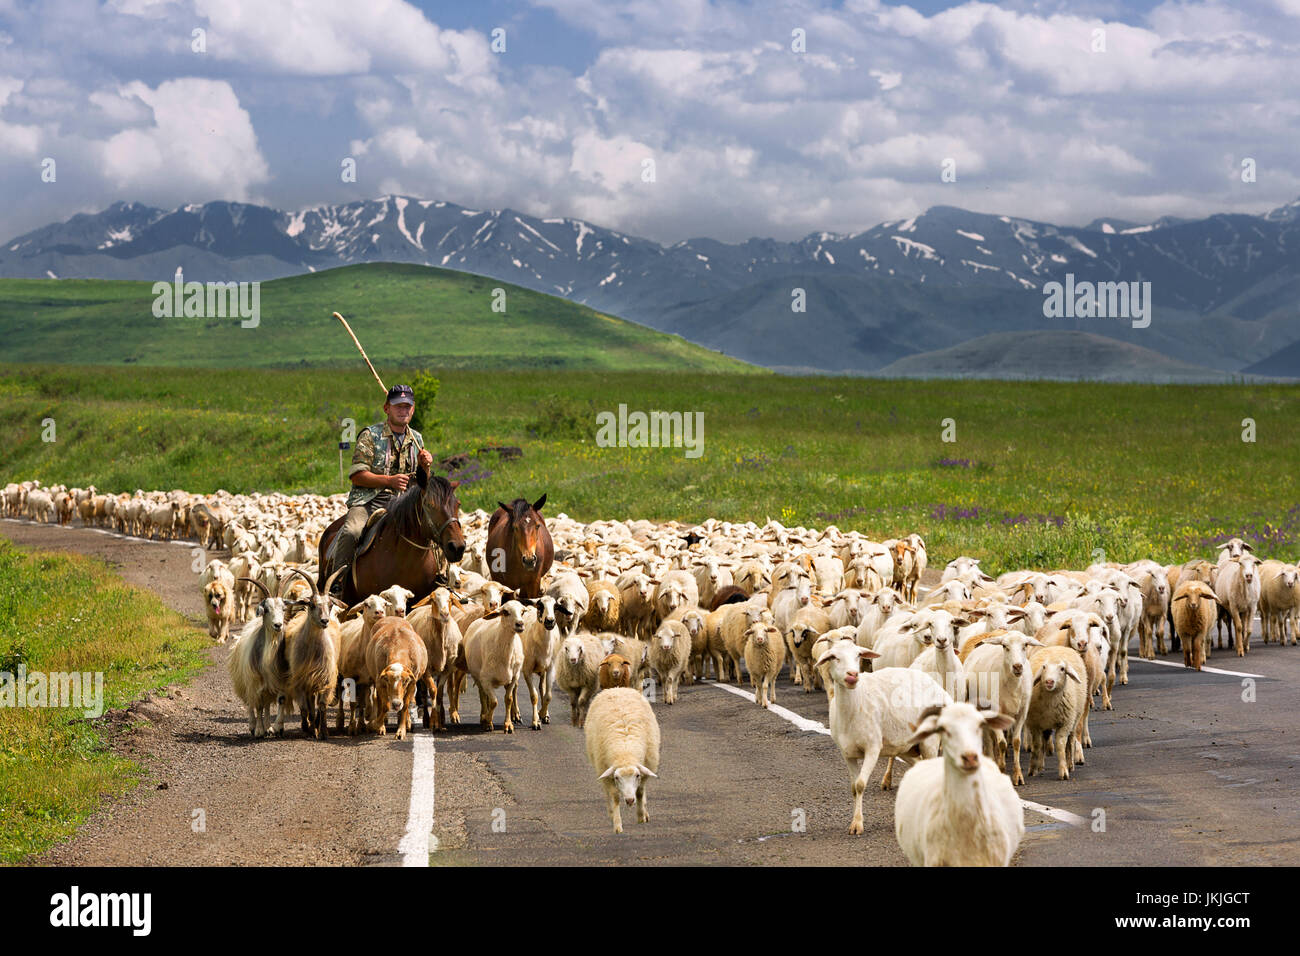 Shepherd on the horse with herd of sheep on the road in Armenia. Stock Photo